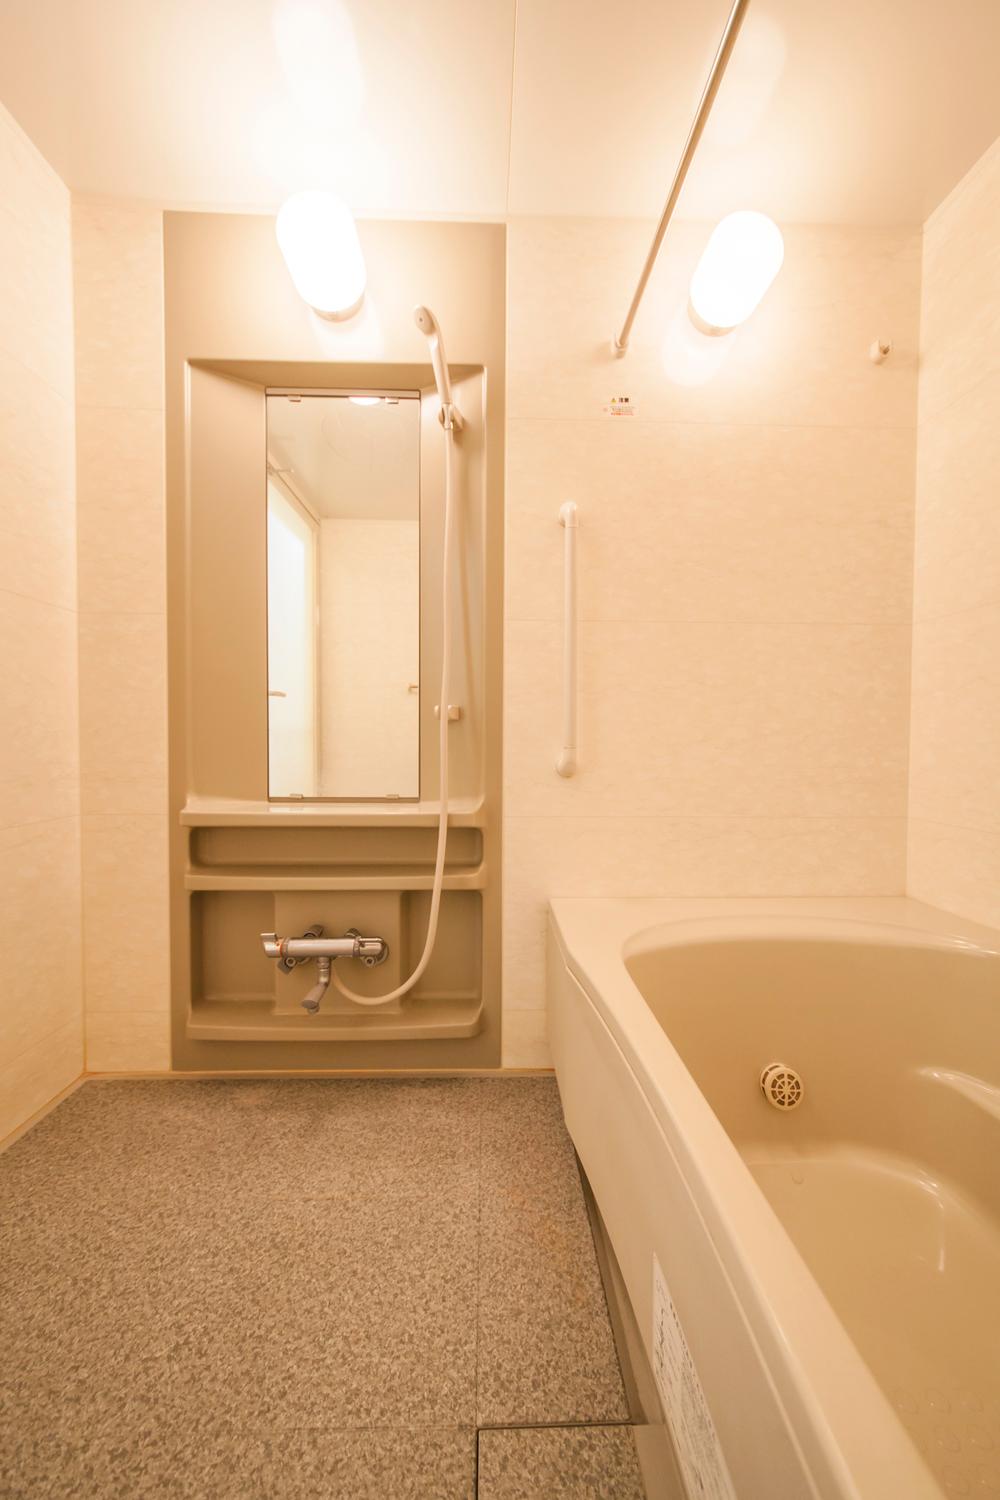 Bathroom. Spacious comfortable put 1620mm size of the tub (with bathroom ventilation dryer)